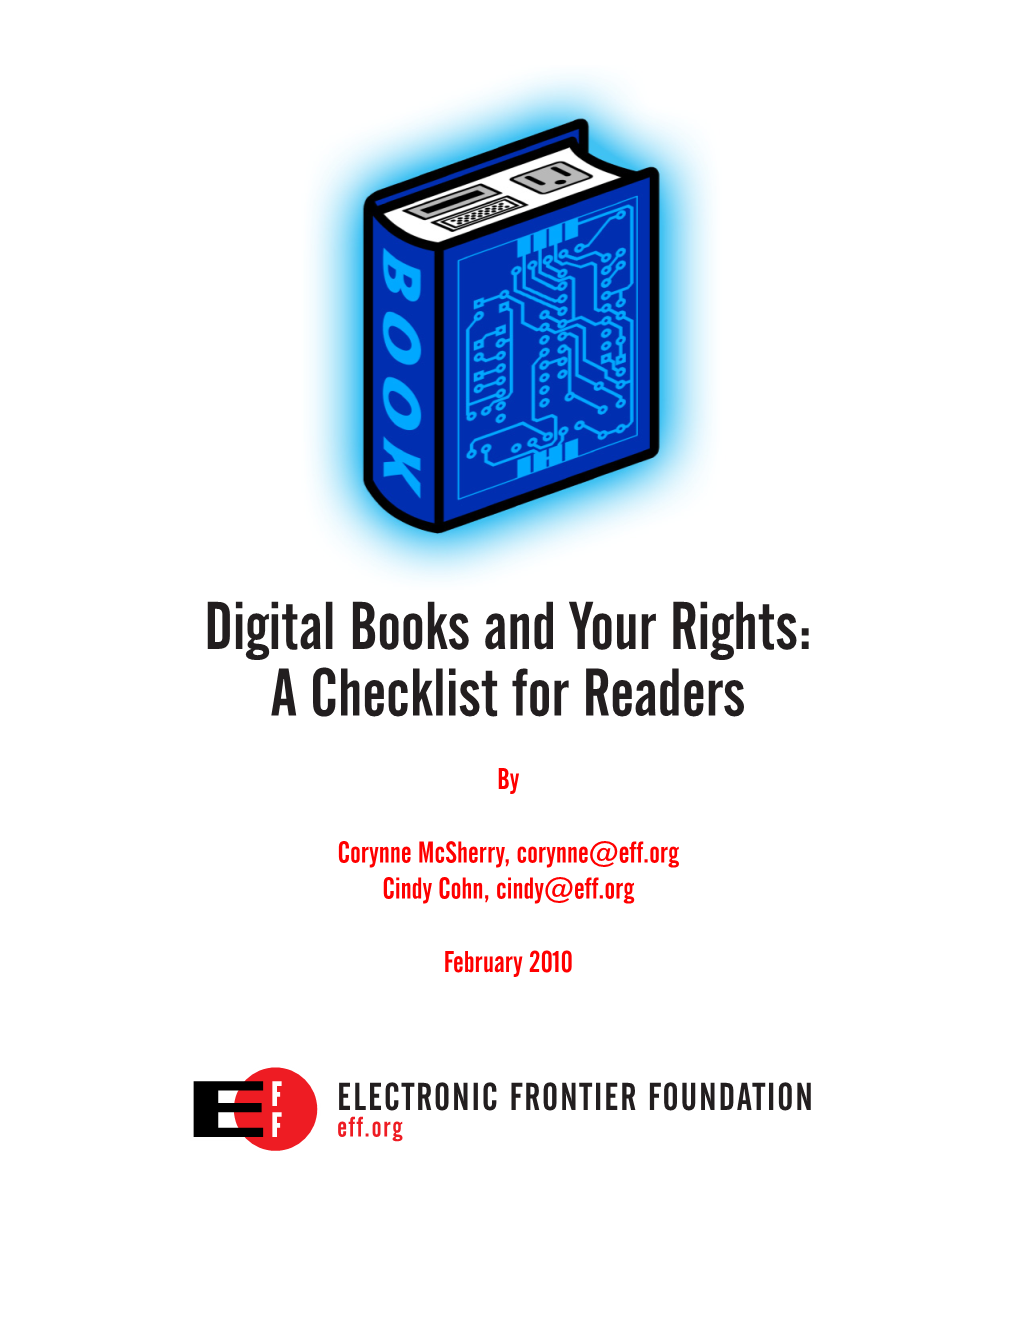 Digital Books and Your Rights: a Checklist for Readers